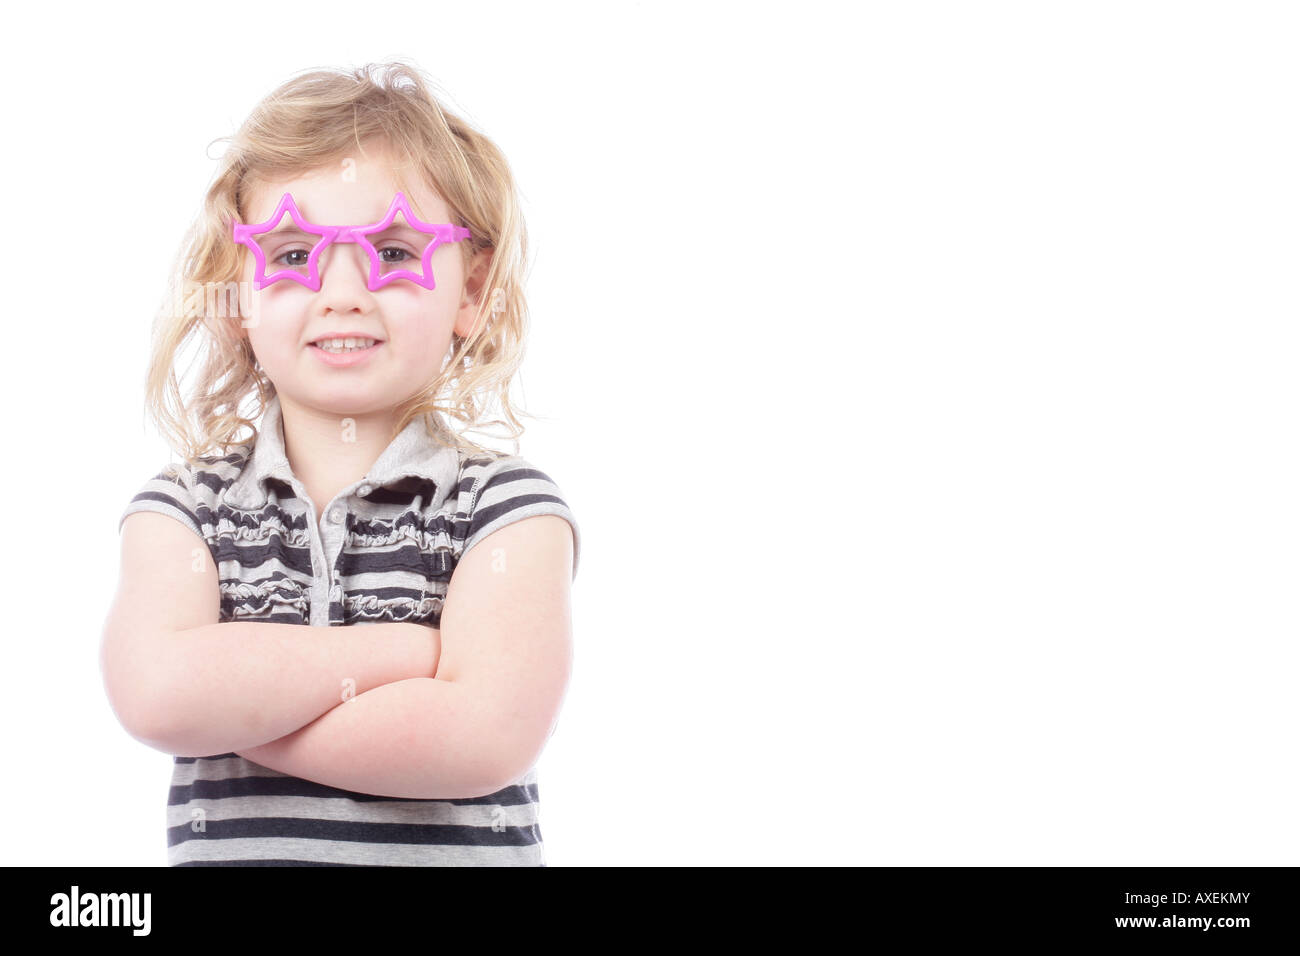 Young Girl Wearing Glasses. Model Released Stock Photo